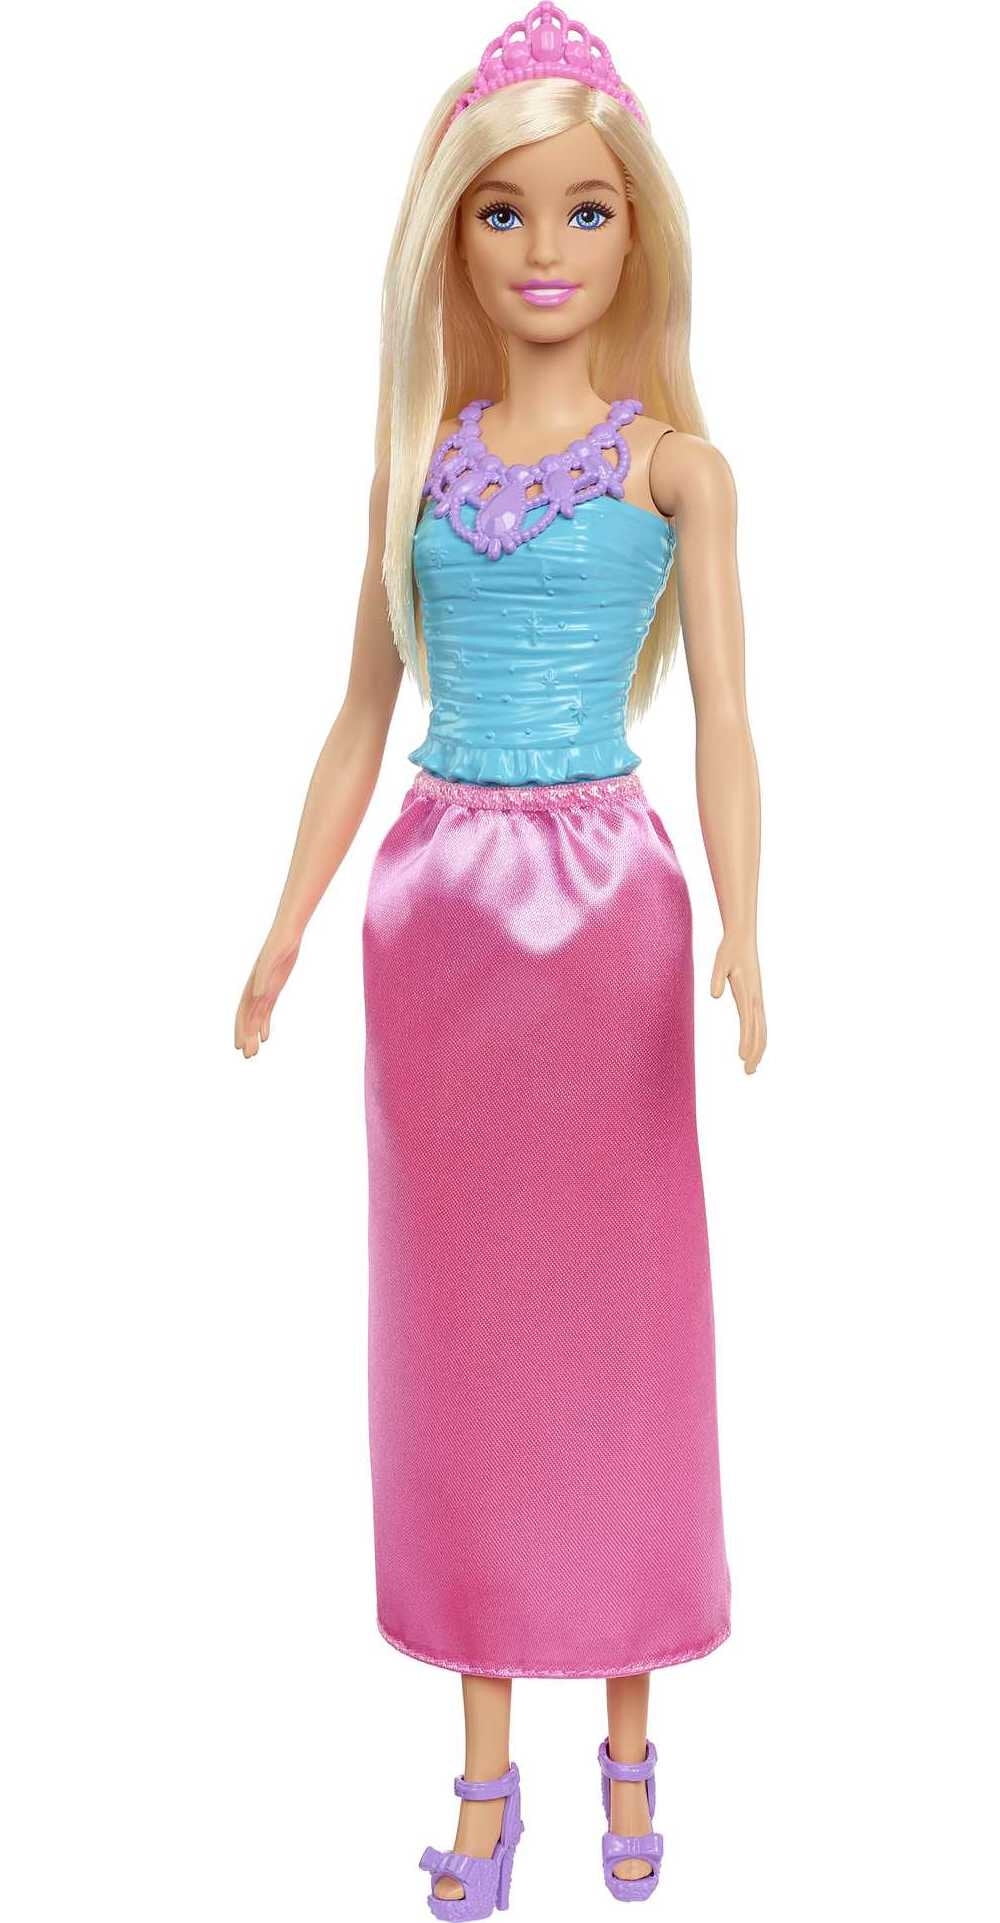 Barbie Dreamtopia Doll & Accessories, Blonde Hair with Removable Pink Skirt, Shoes & Tiara